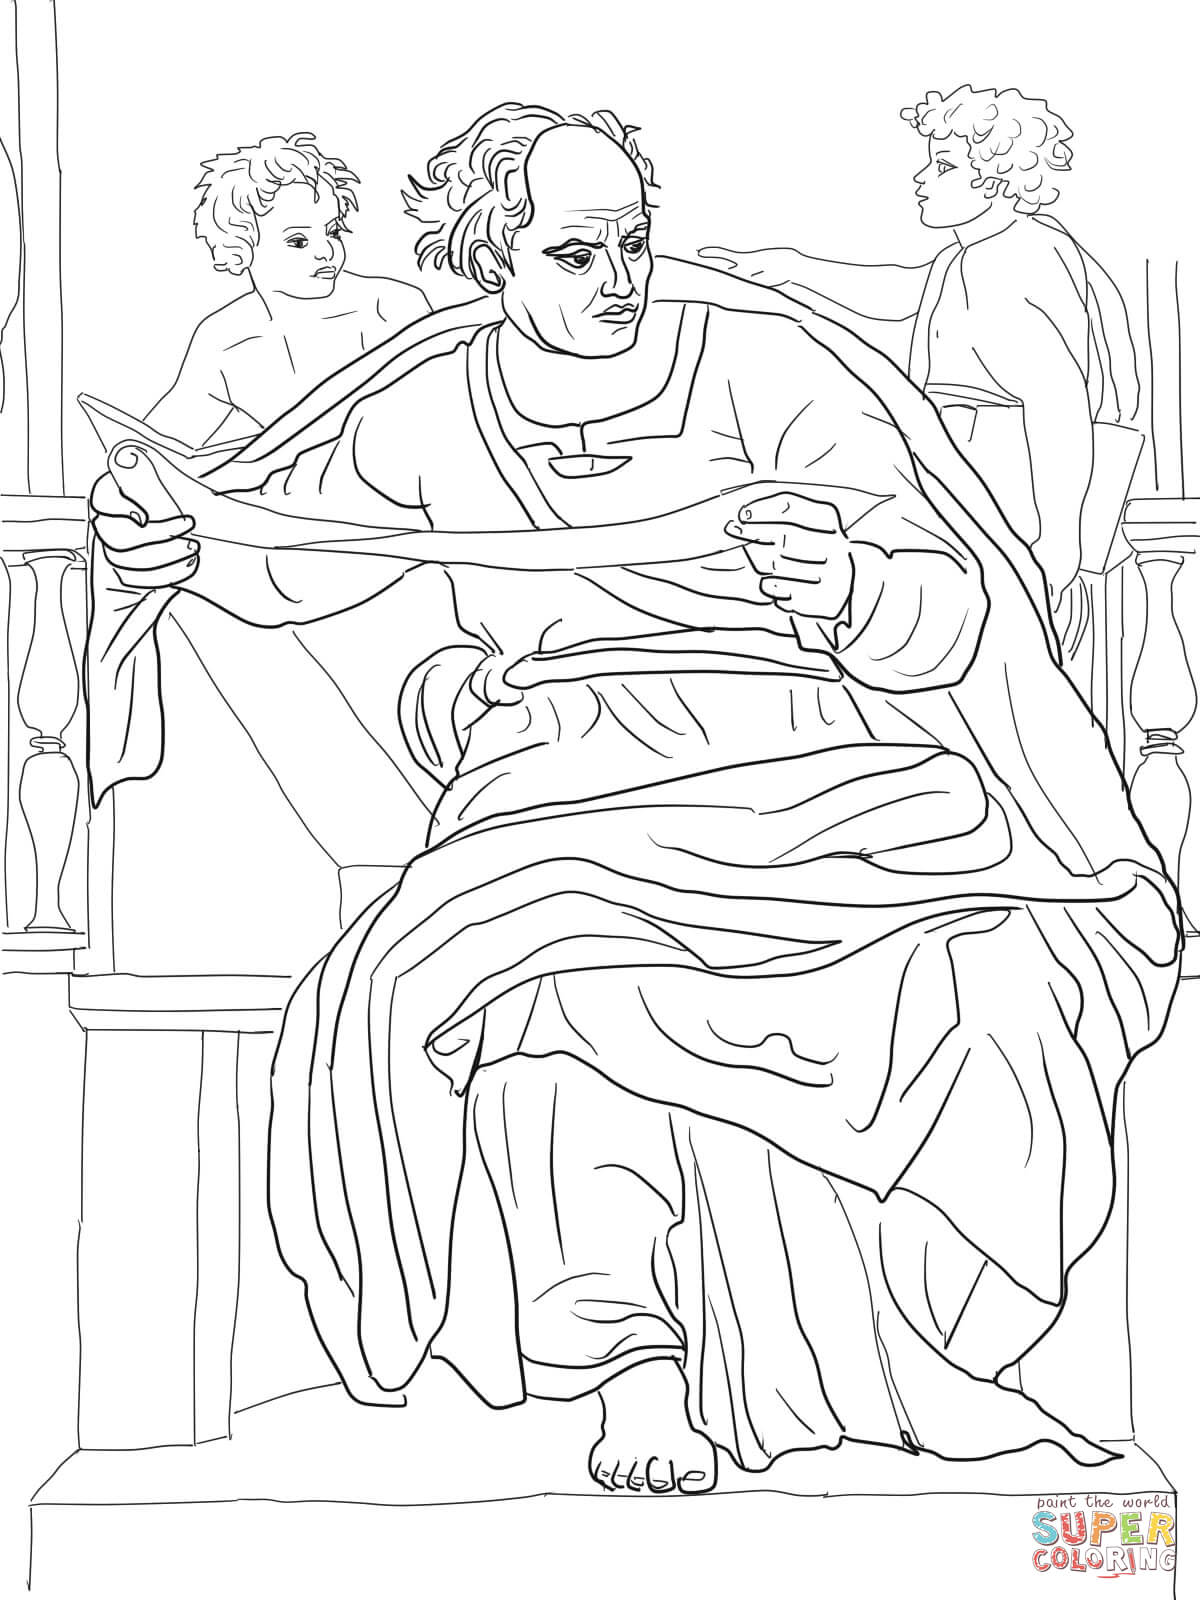 Prophet Joel coloring page | Free Printable Coloring Pages